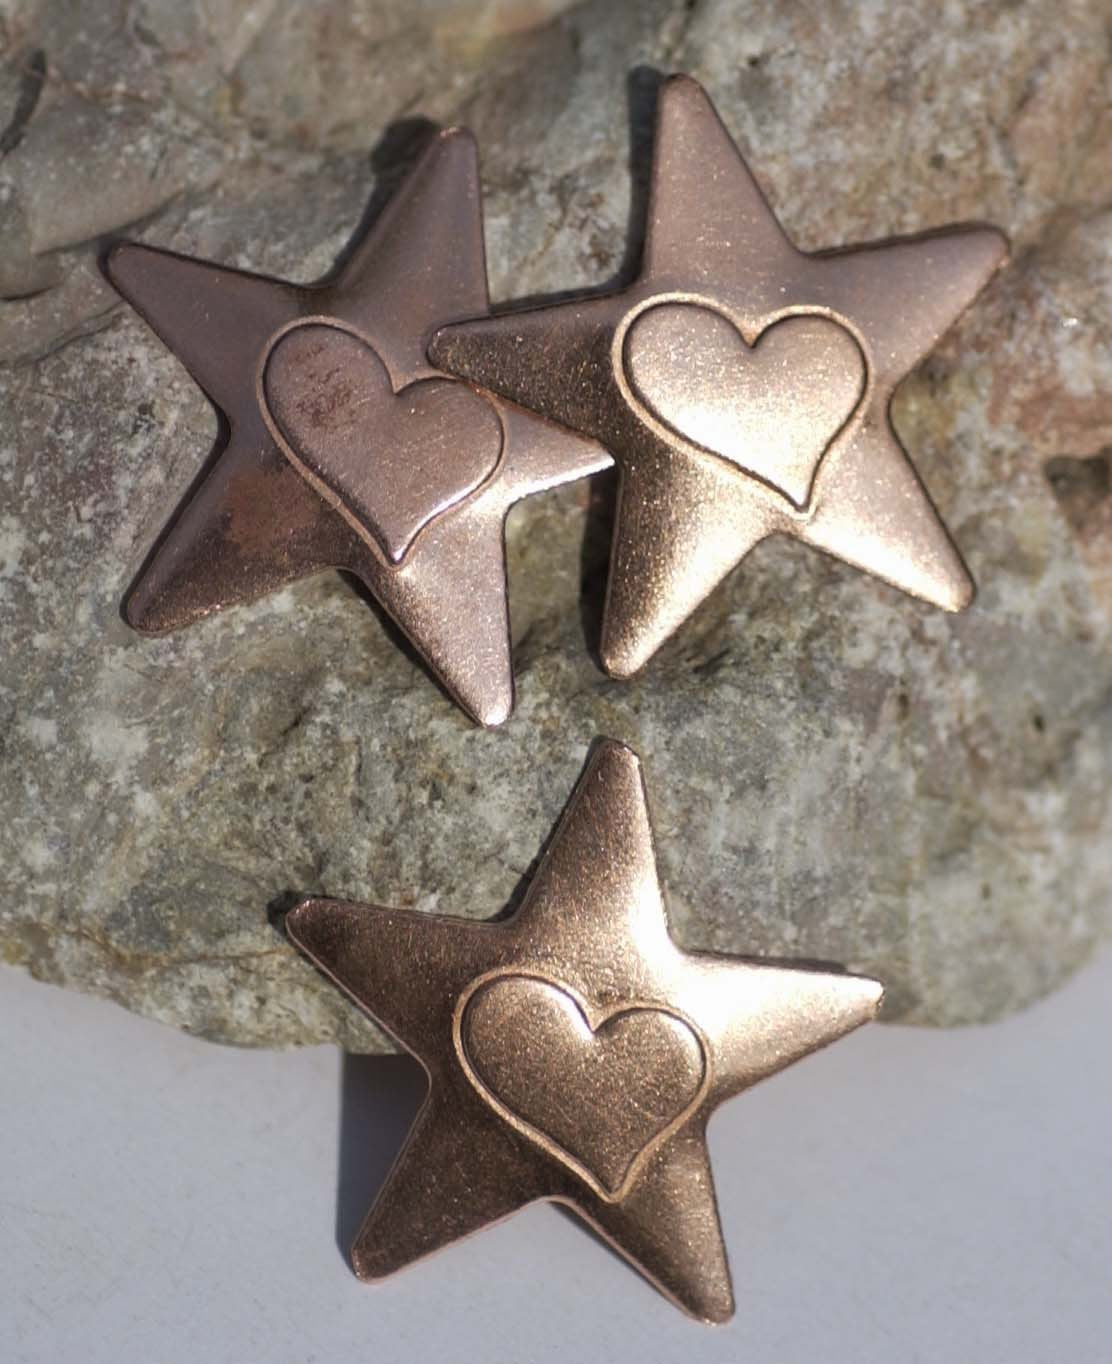 31mm Star with Heart Embossed Blank Cutout for Enameling Stamping Texturing Metalworking Jewelry Making Blanks - 4 pieces